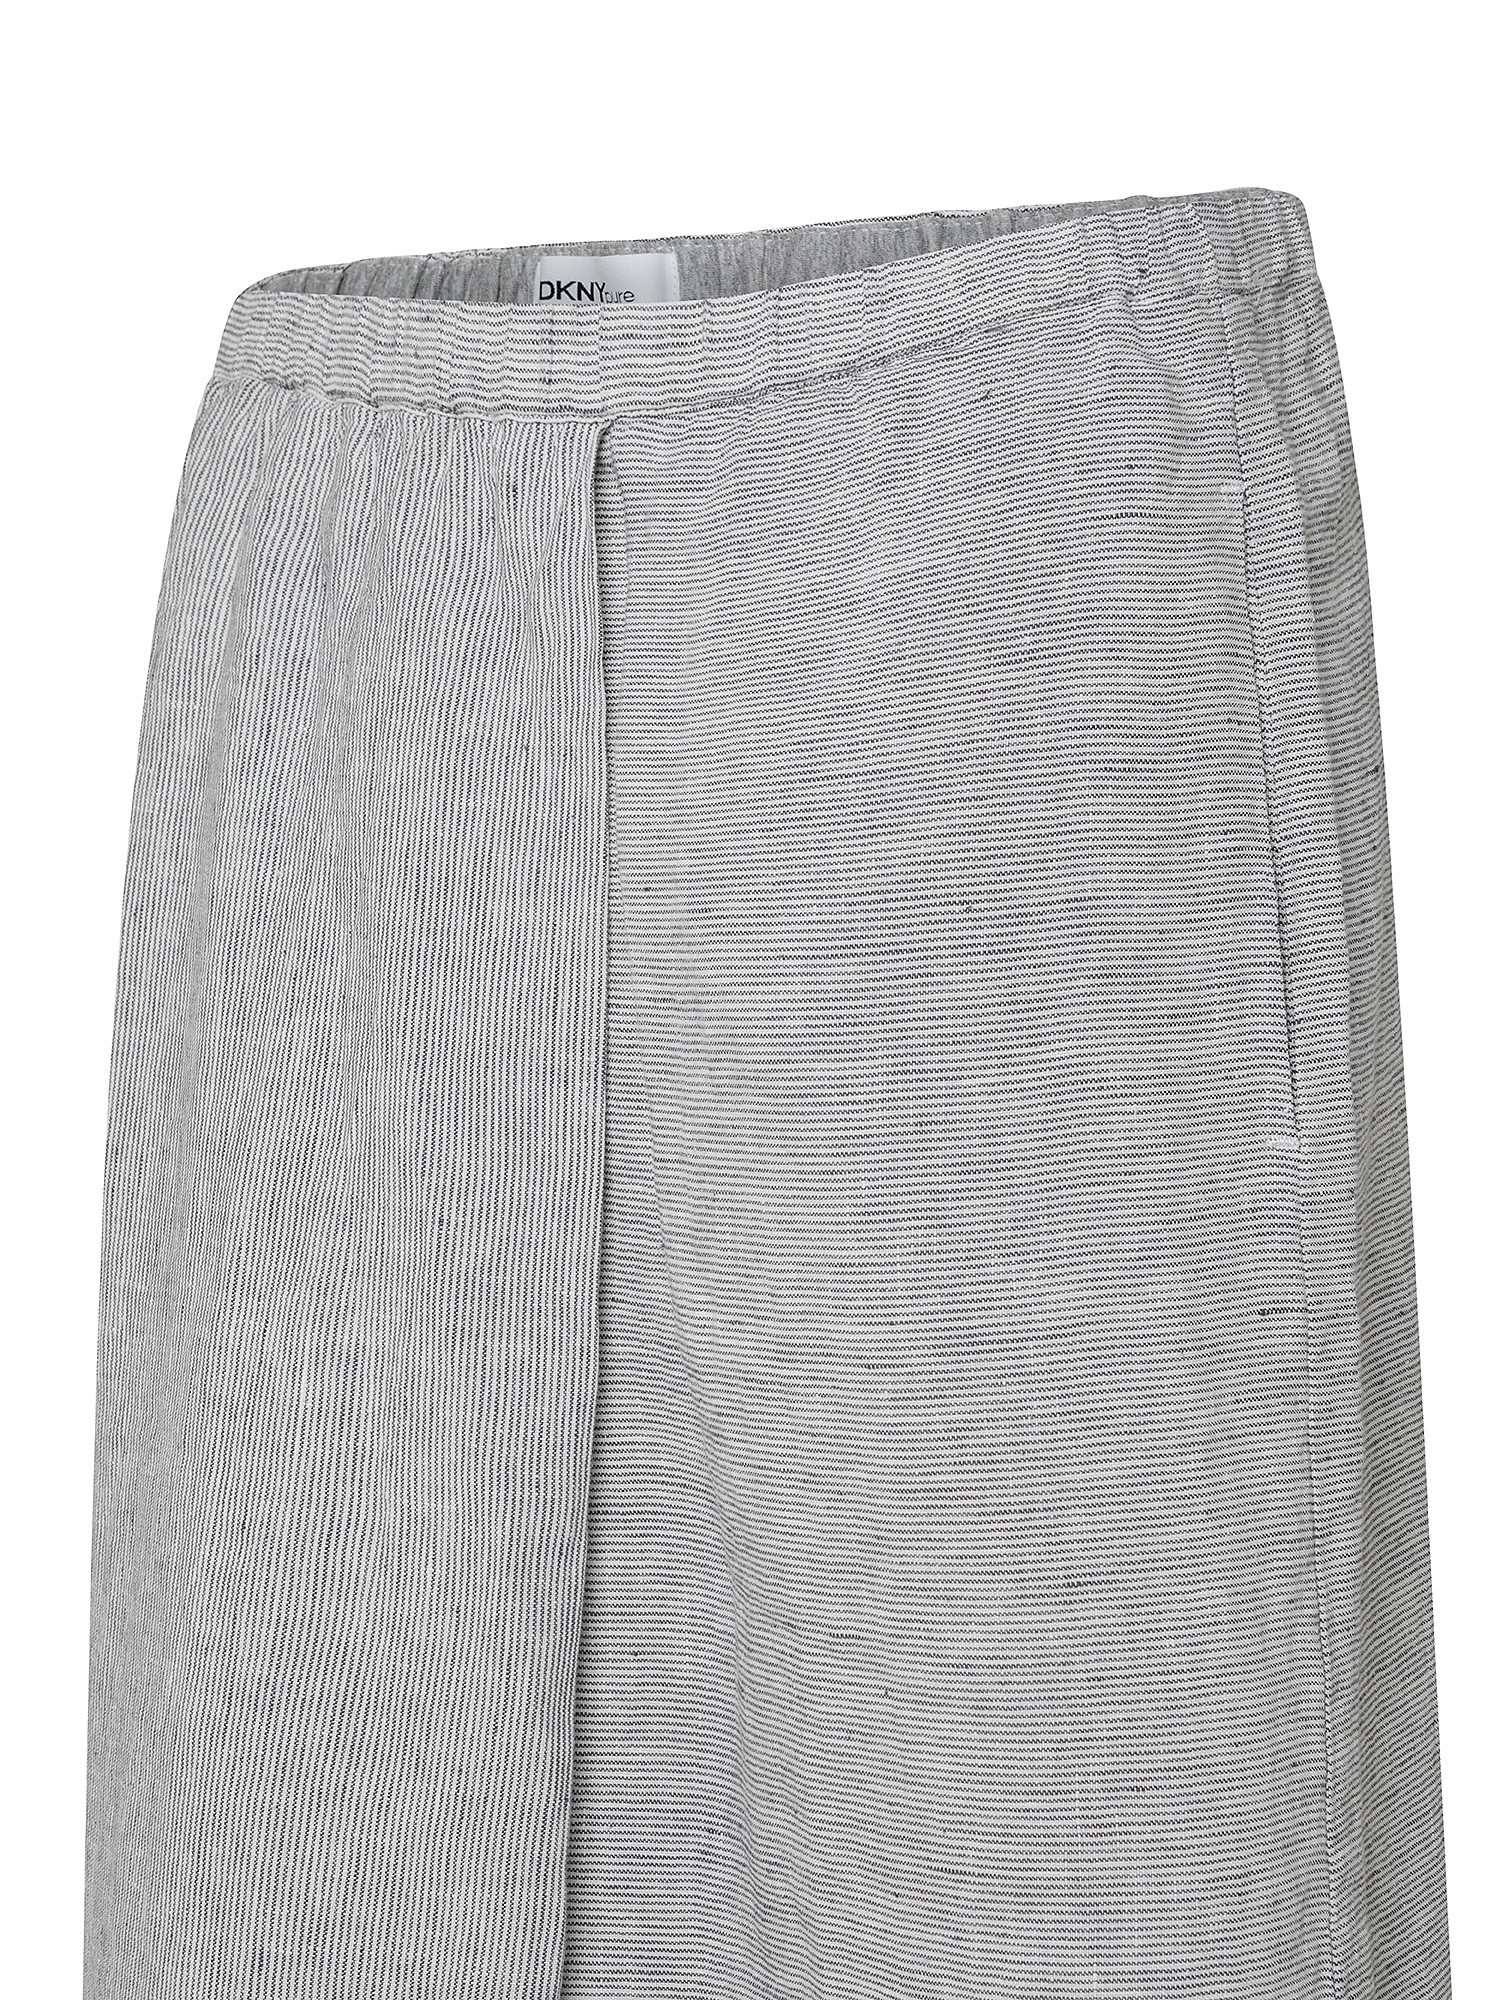 Pantalone jogger a righe, Grigio, large image number 1